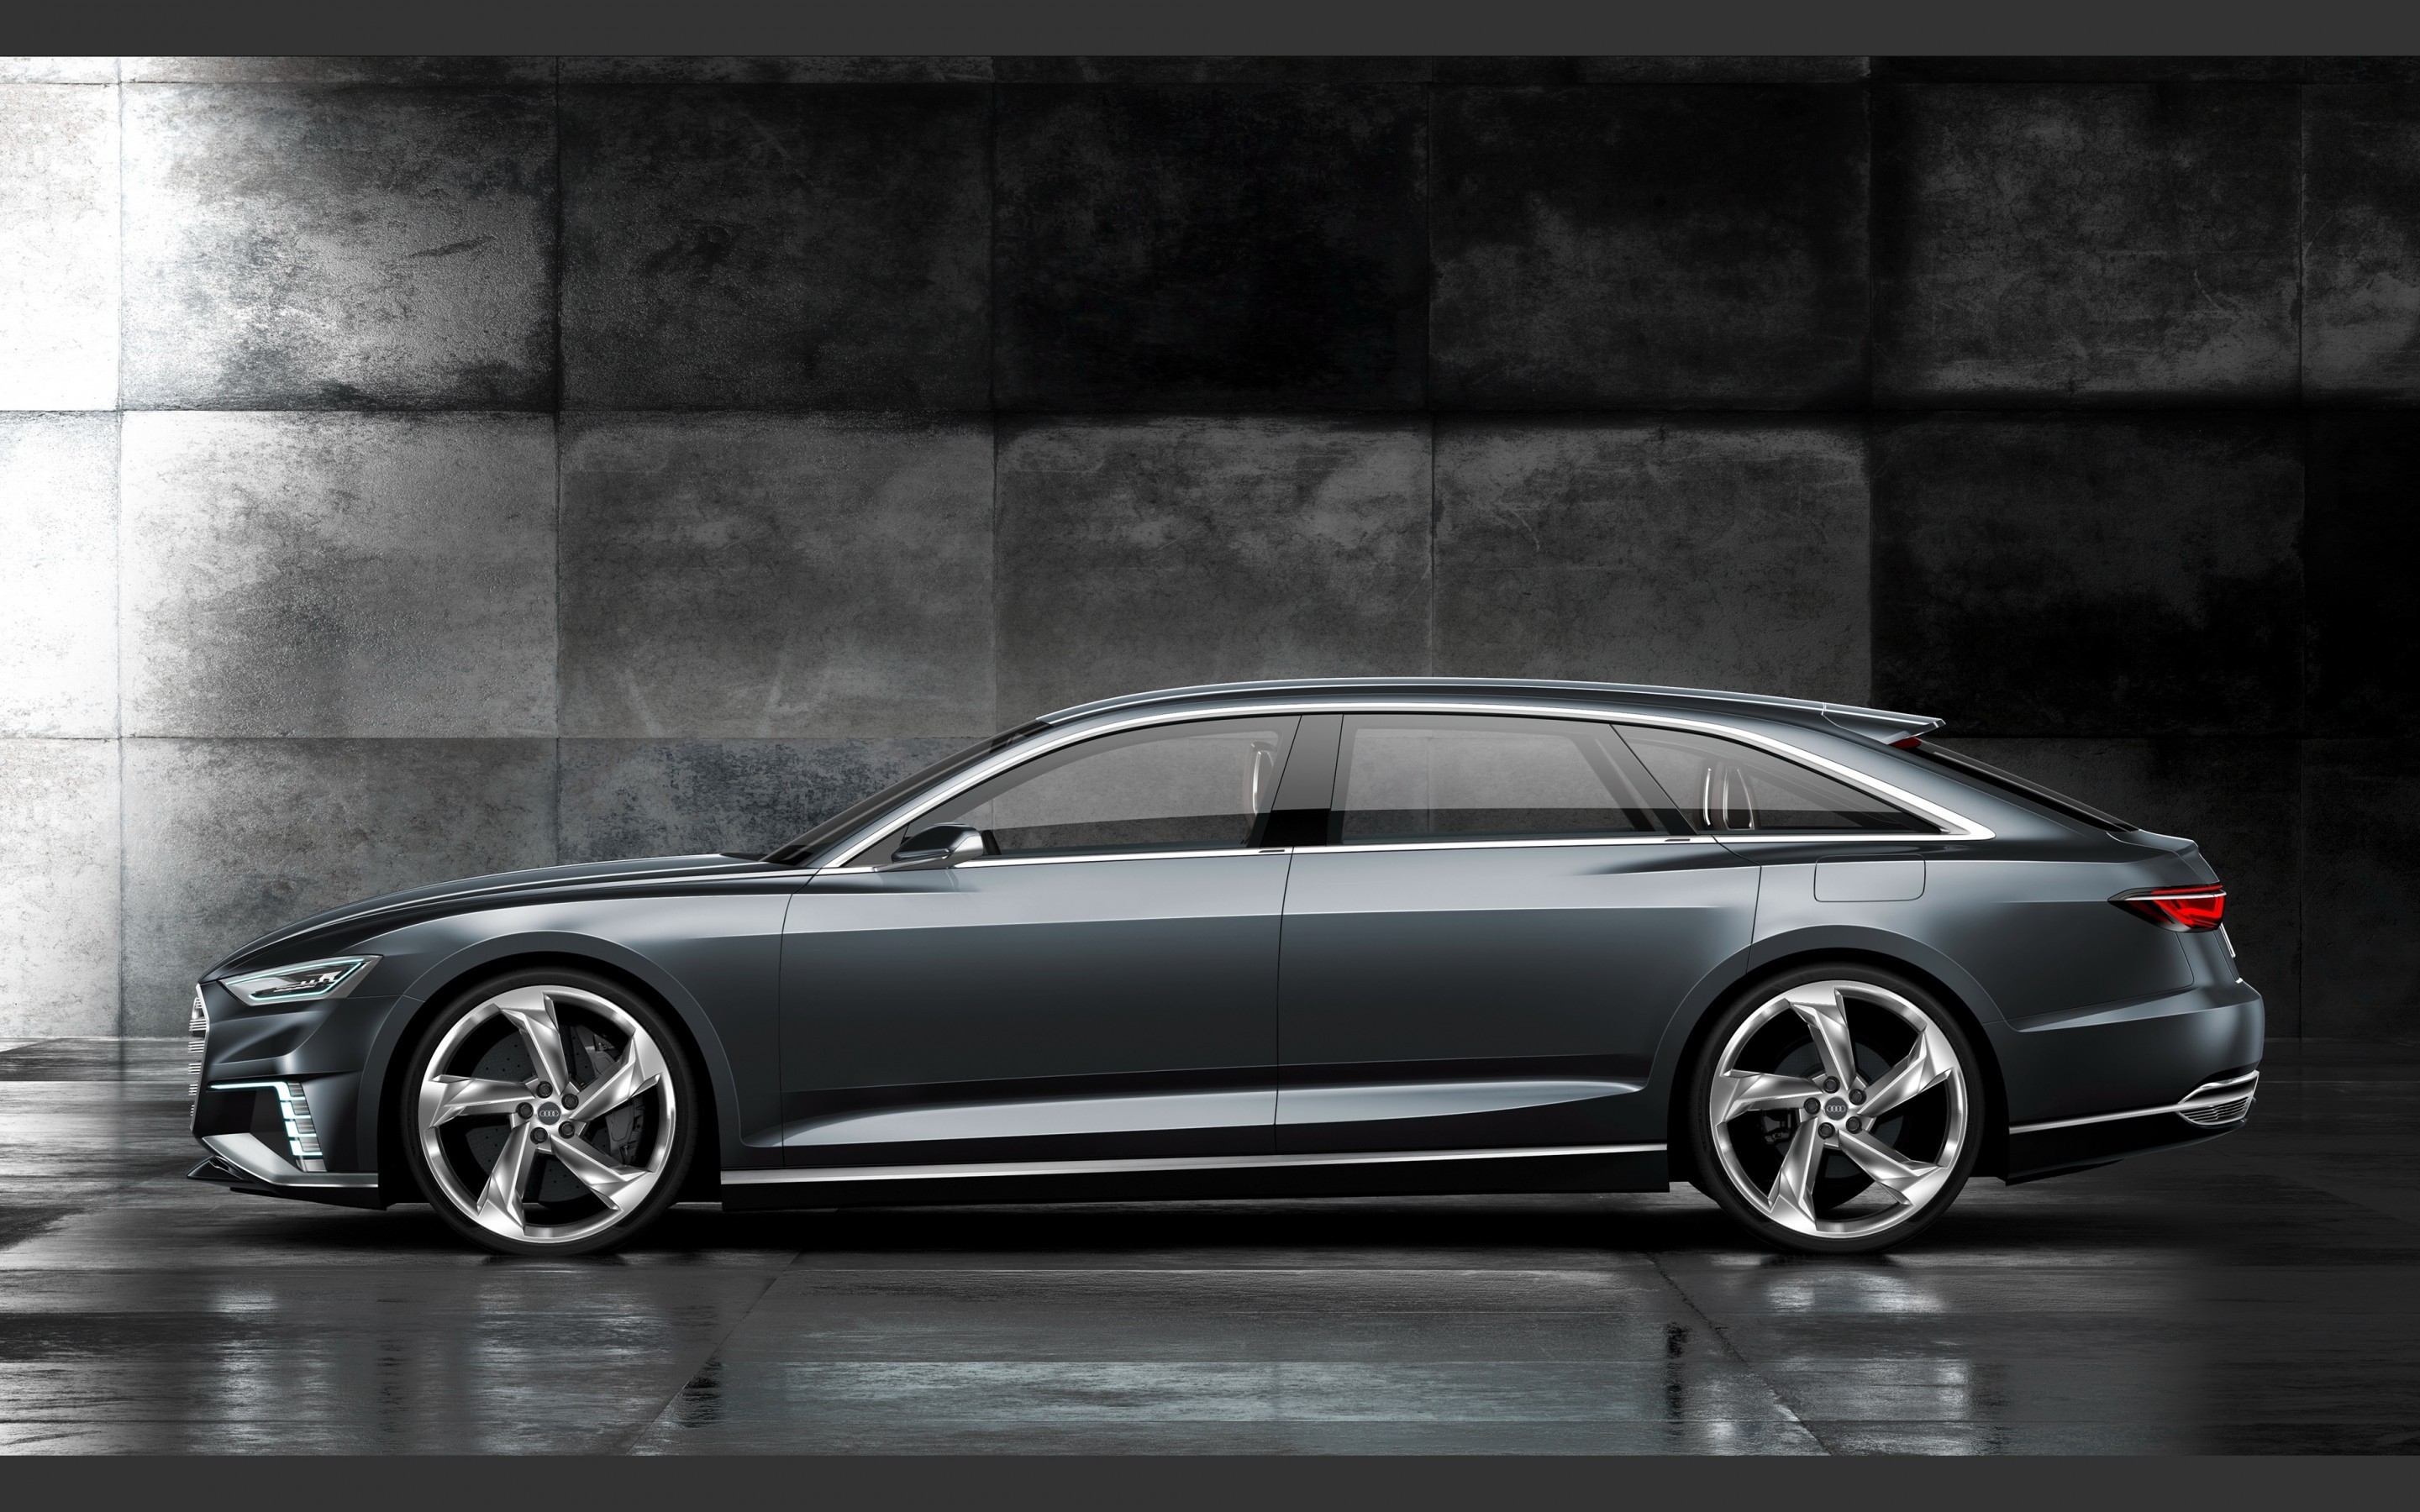 Audi Prologue Side View for 2880 x 1800 Retina Display resolution